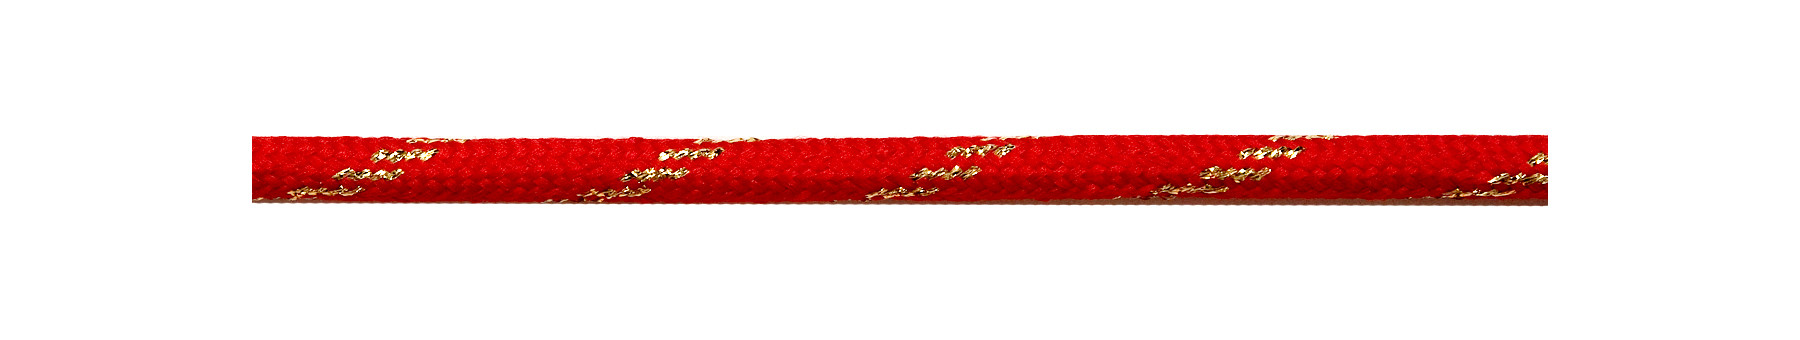 Textile Cable Red-Gold Twist